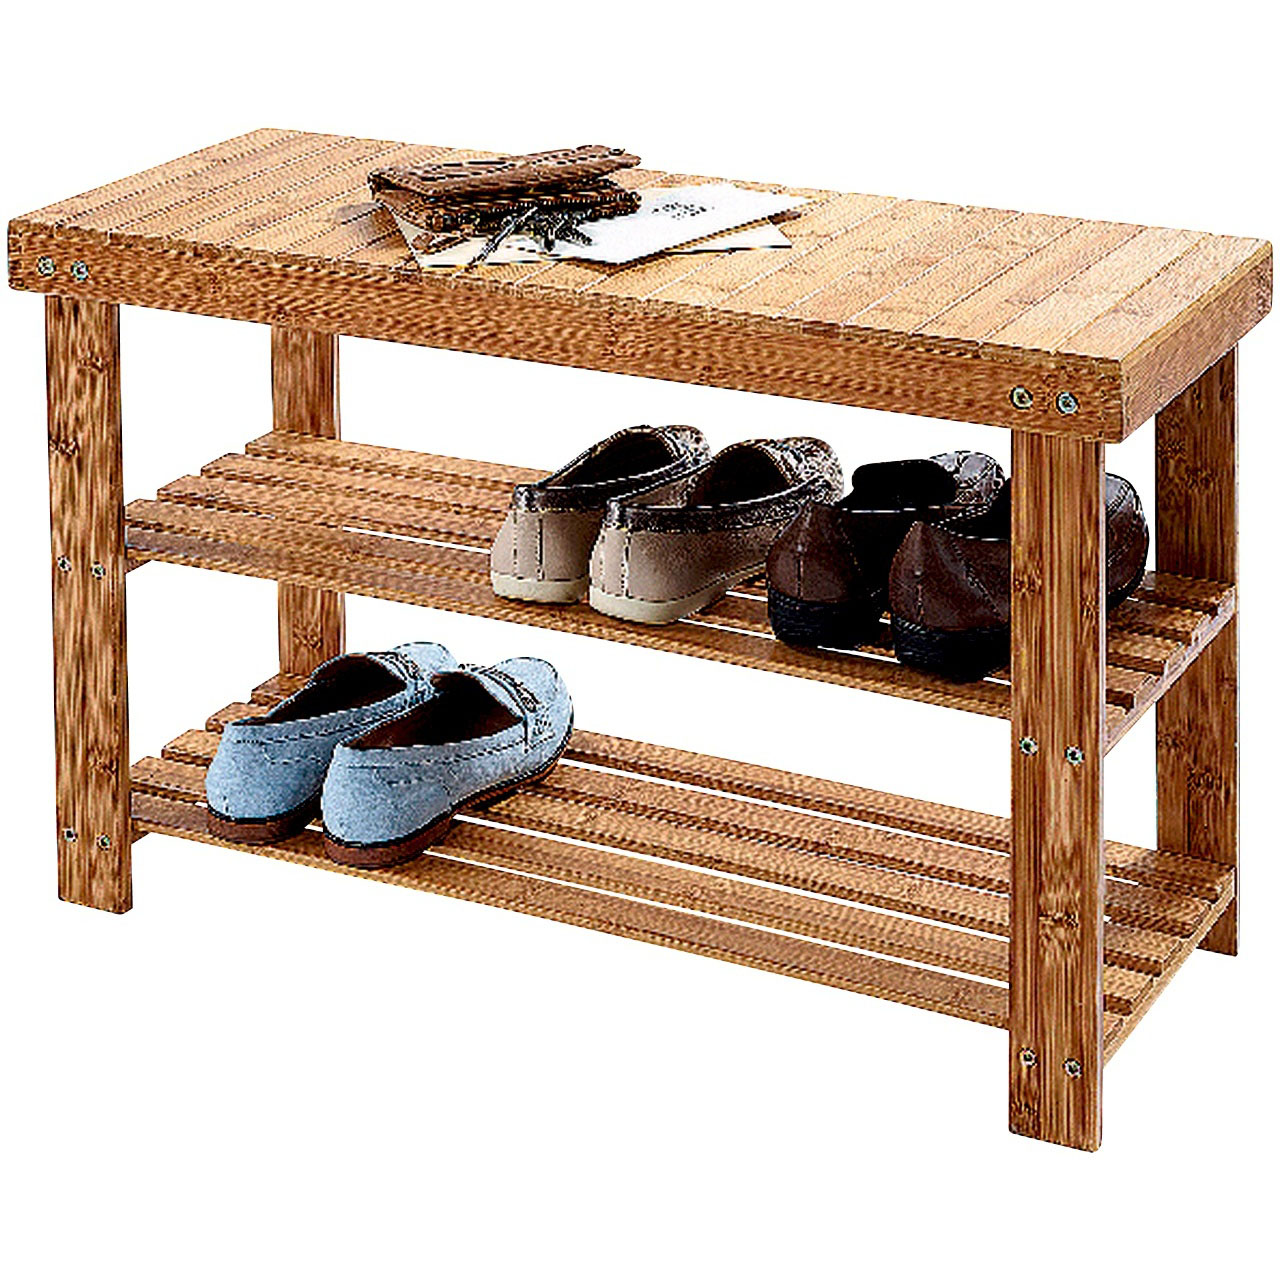 Bamboo Shoe Stand